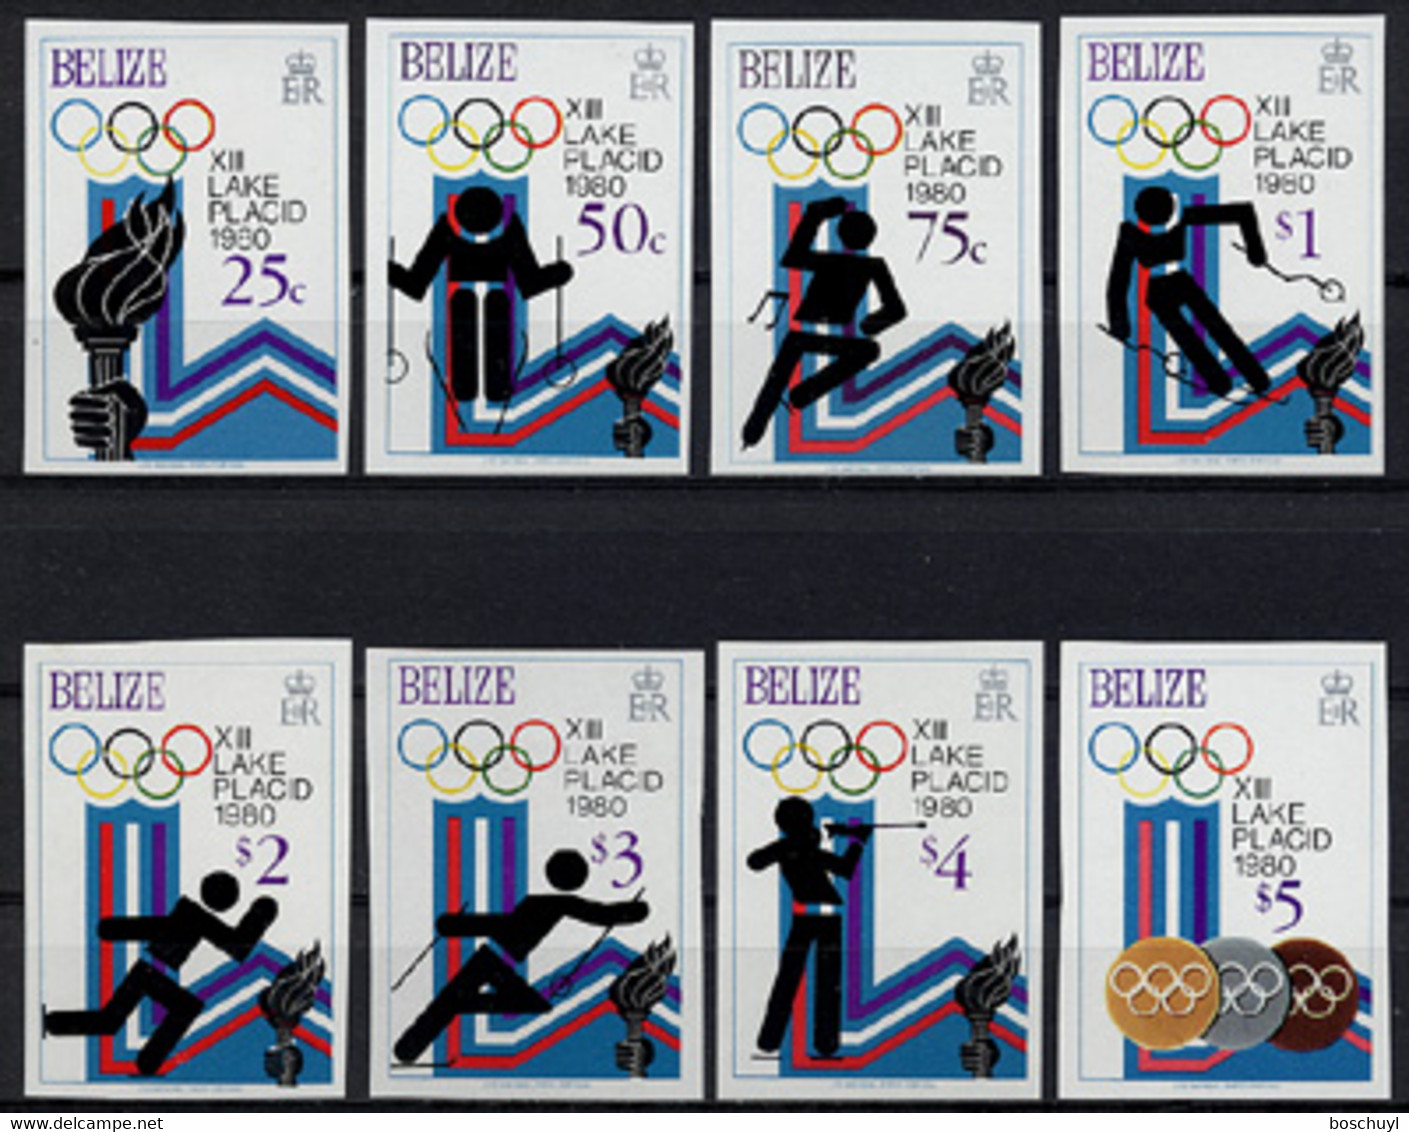 Belize, 1979, Olympic Winter Games Lake Placid, Sports, MNH Imperforated, Michel 443-450B - Belize (1973-...)